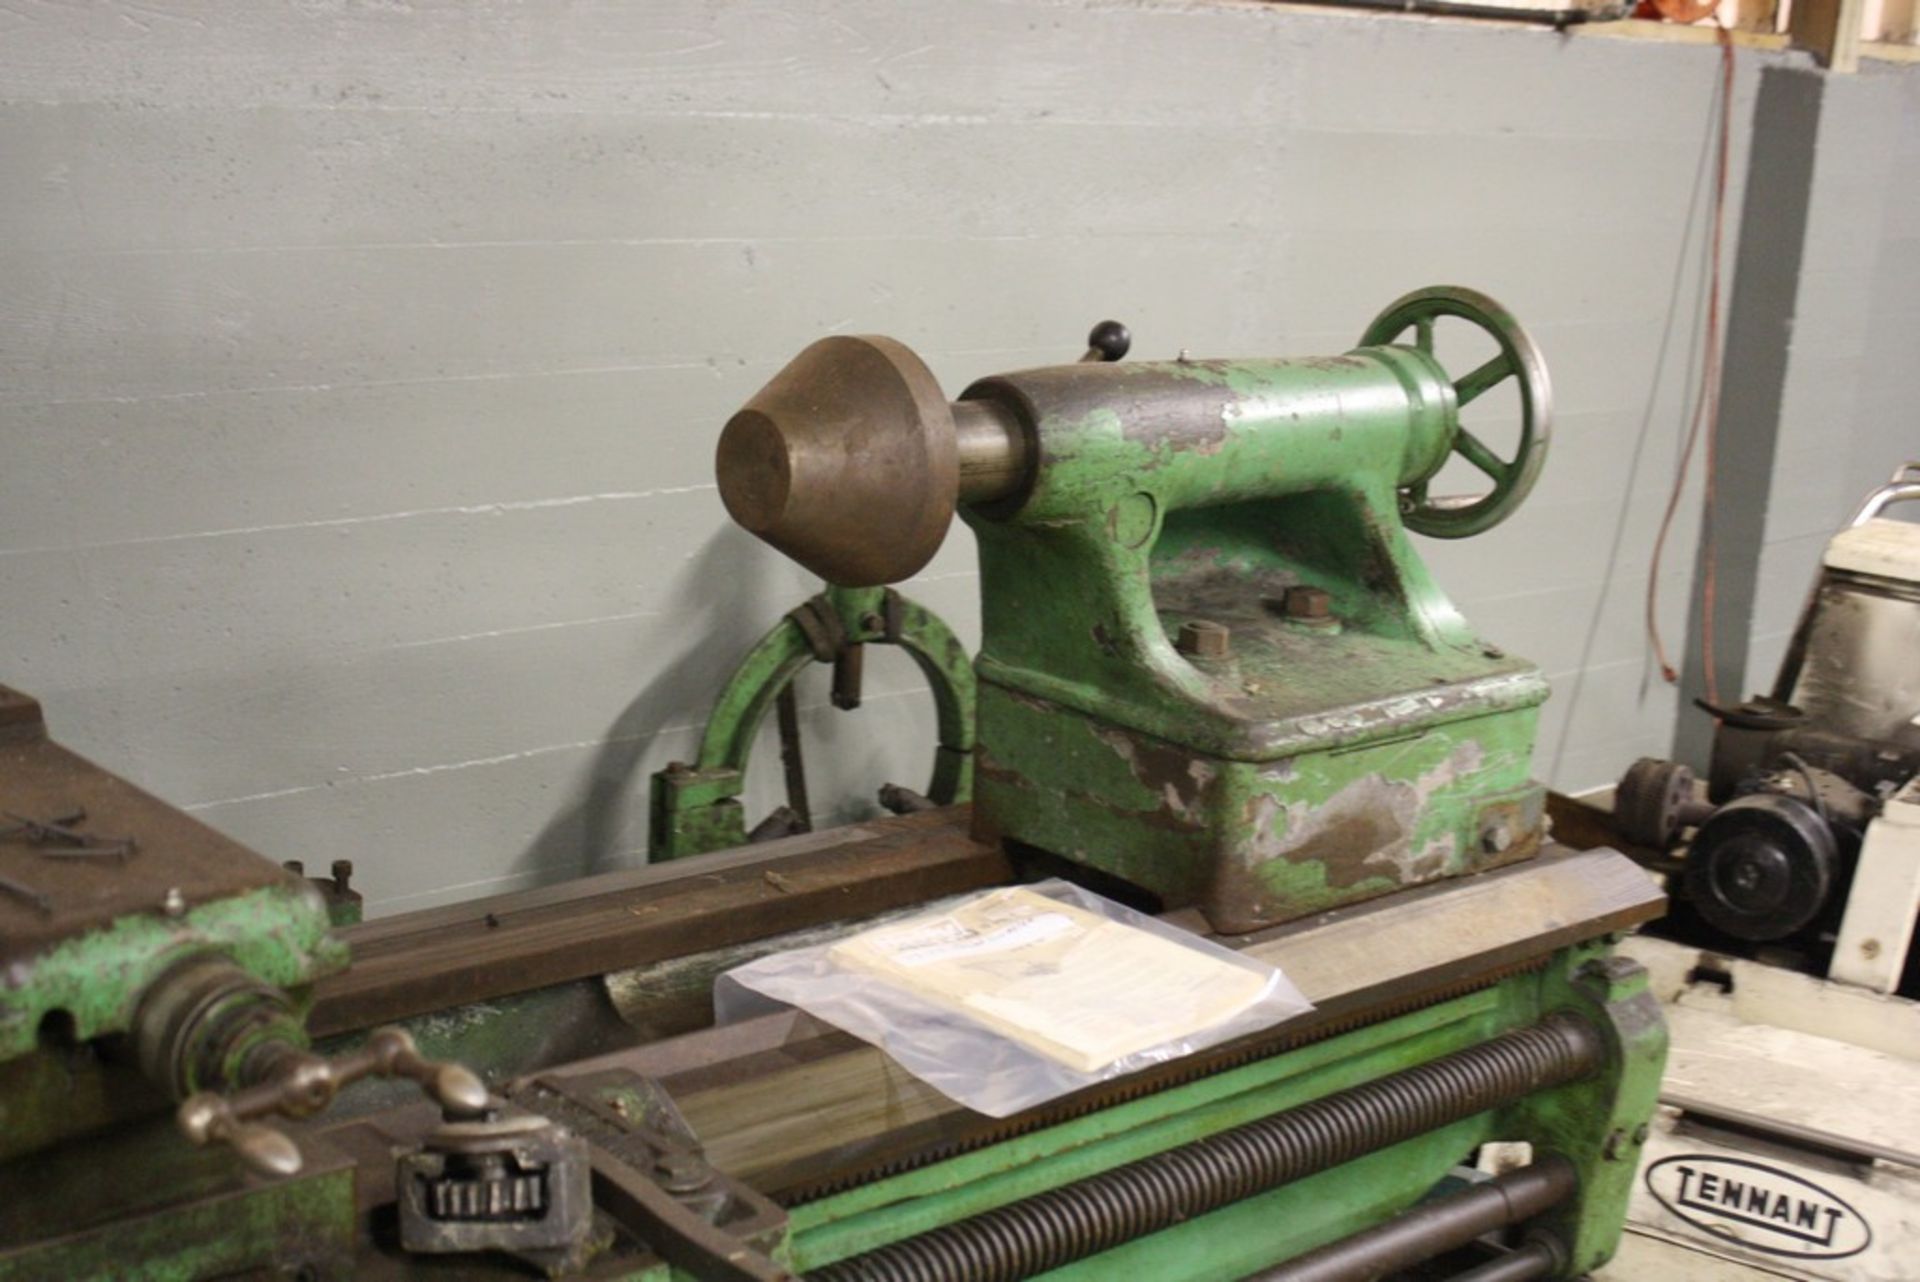 HEYLIGENSTAEDT 36" X84" TOOL ROOM LATHE, S/N 6061-1957, 560 RPM SPINDLE, 24" 4-JAW CHUCK, TAPER - Image 4 of 5